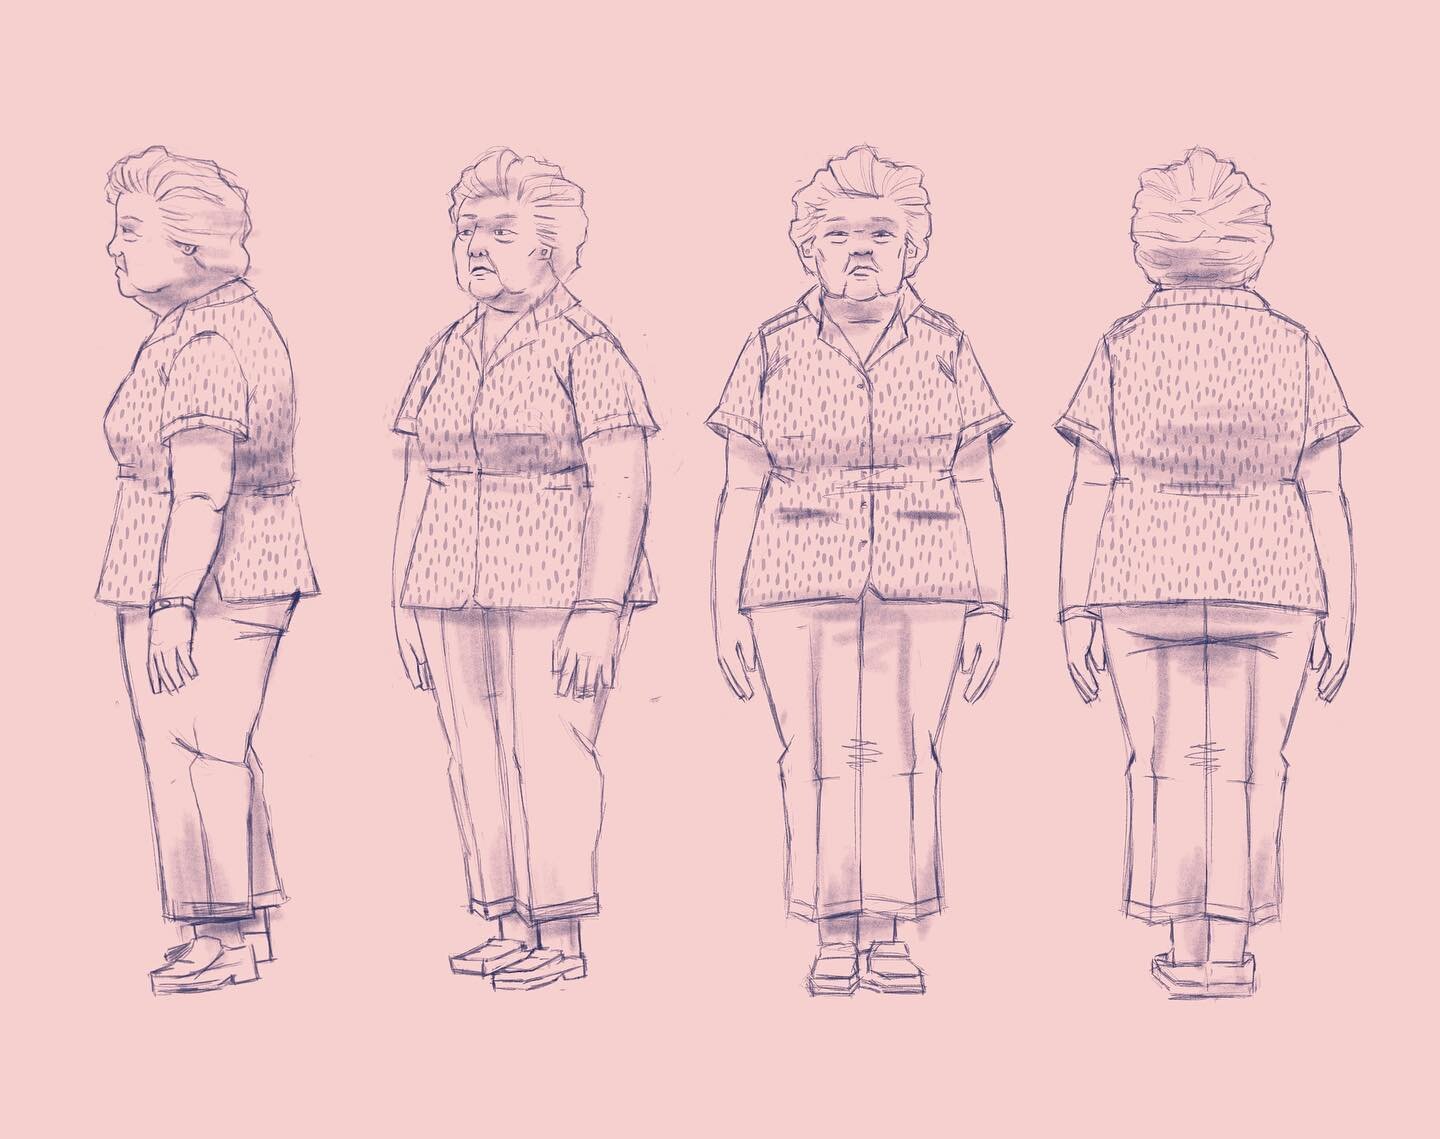 Helps to make these sometimes. I try to think of it as a road map for when I get lost- and I do get quite lost sometimes. This one is based on a few beloved grandmas I&rsquo;ve known, some of them gone now. #modelsheet #characterdesign #sketch #wip #